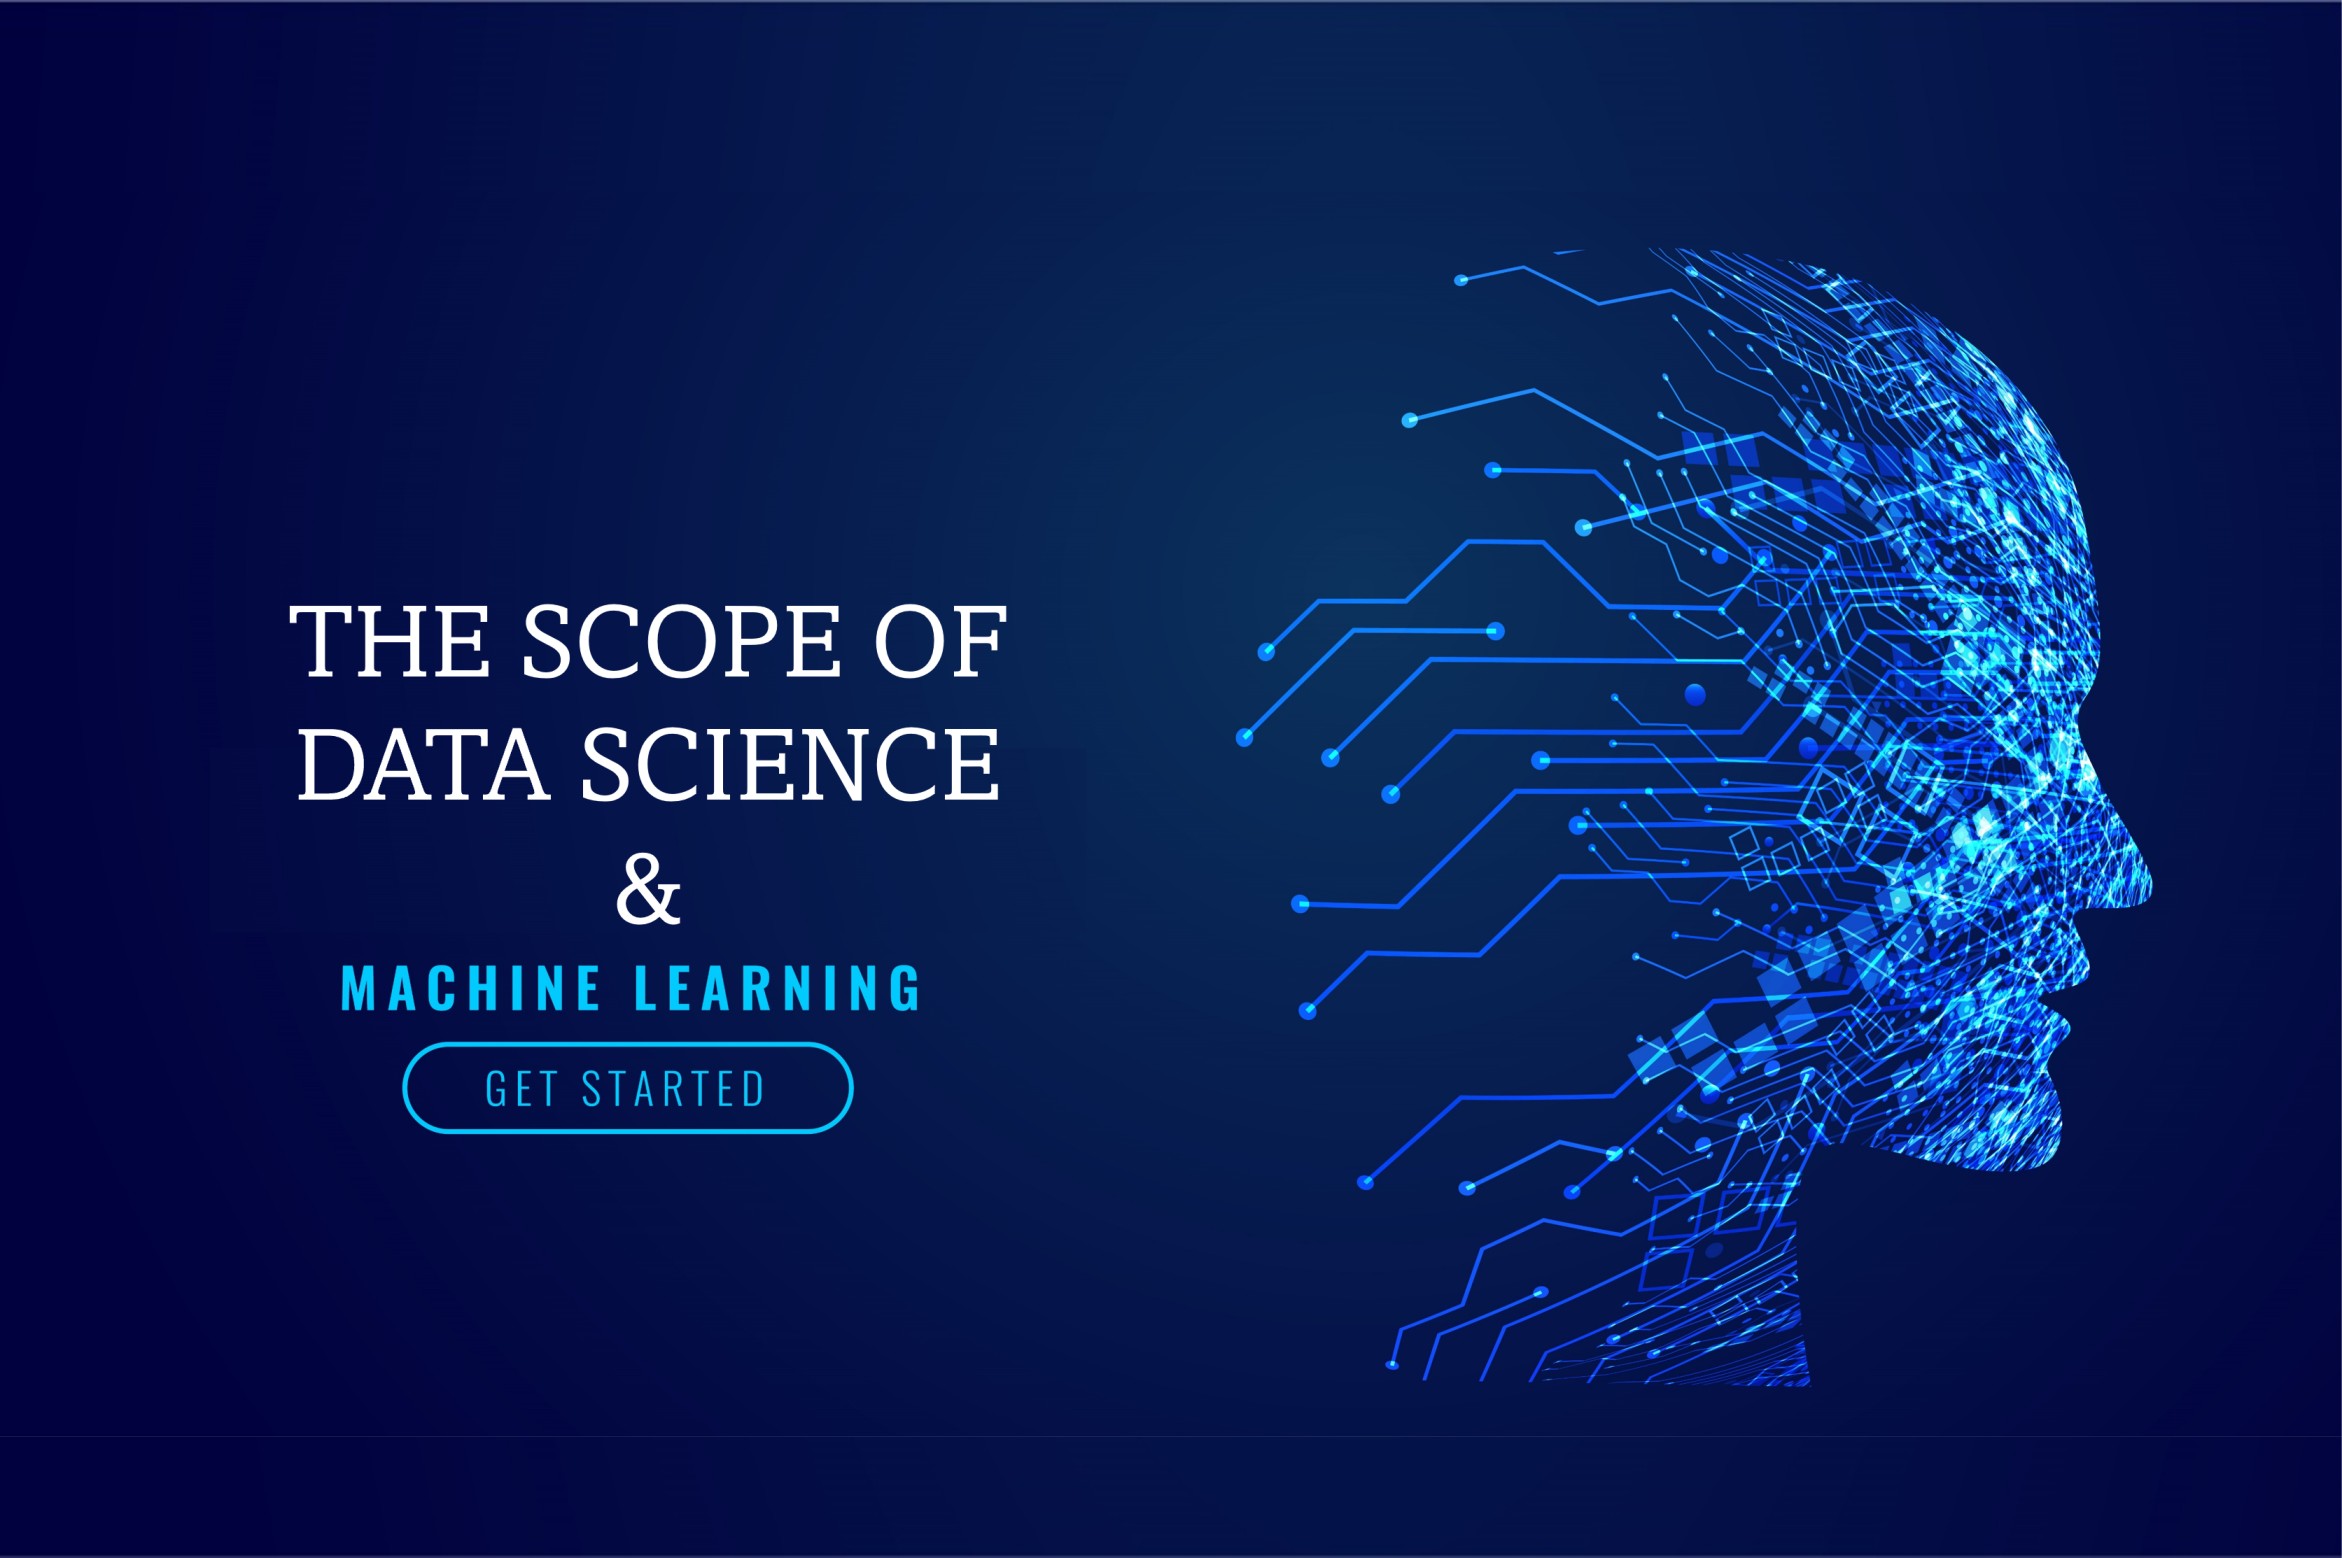 What is the scope of Data Science & Machine Learning?